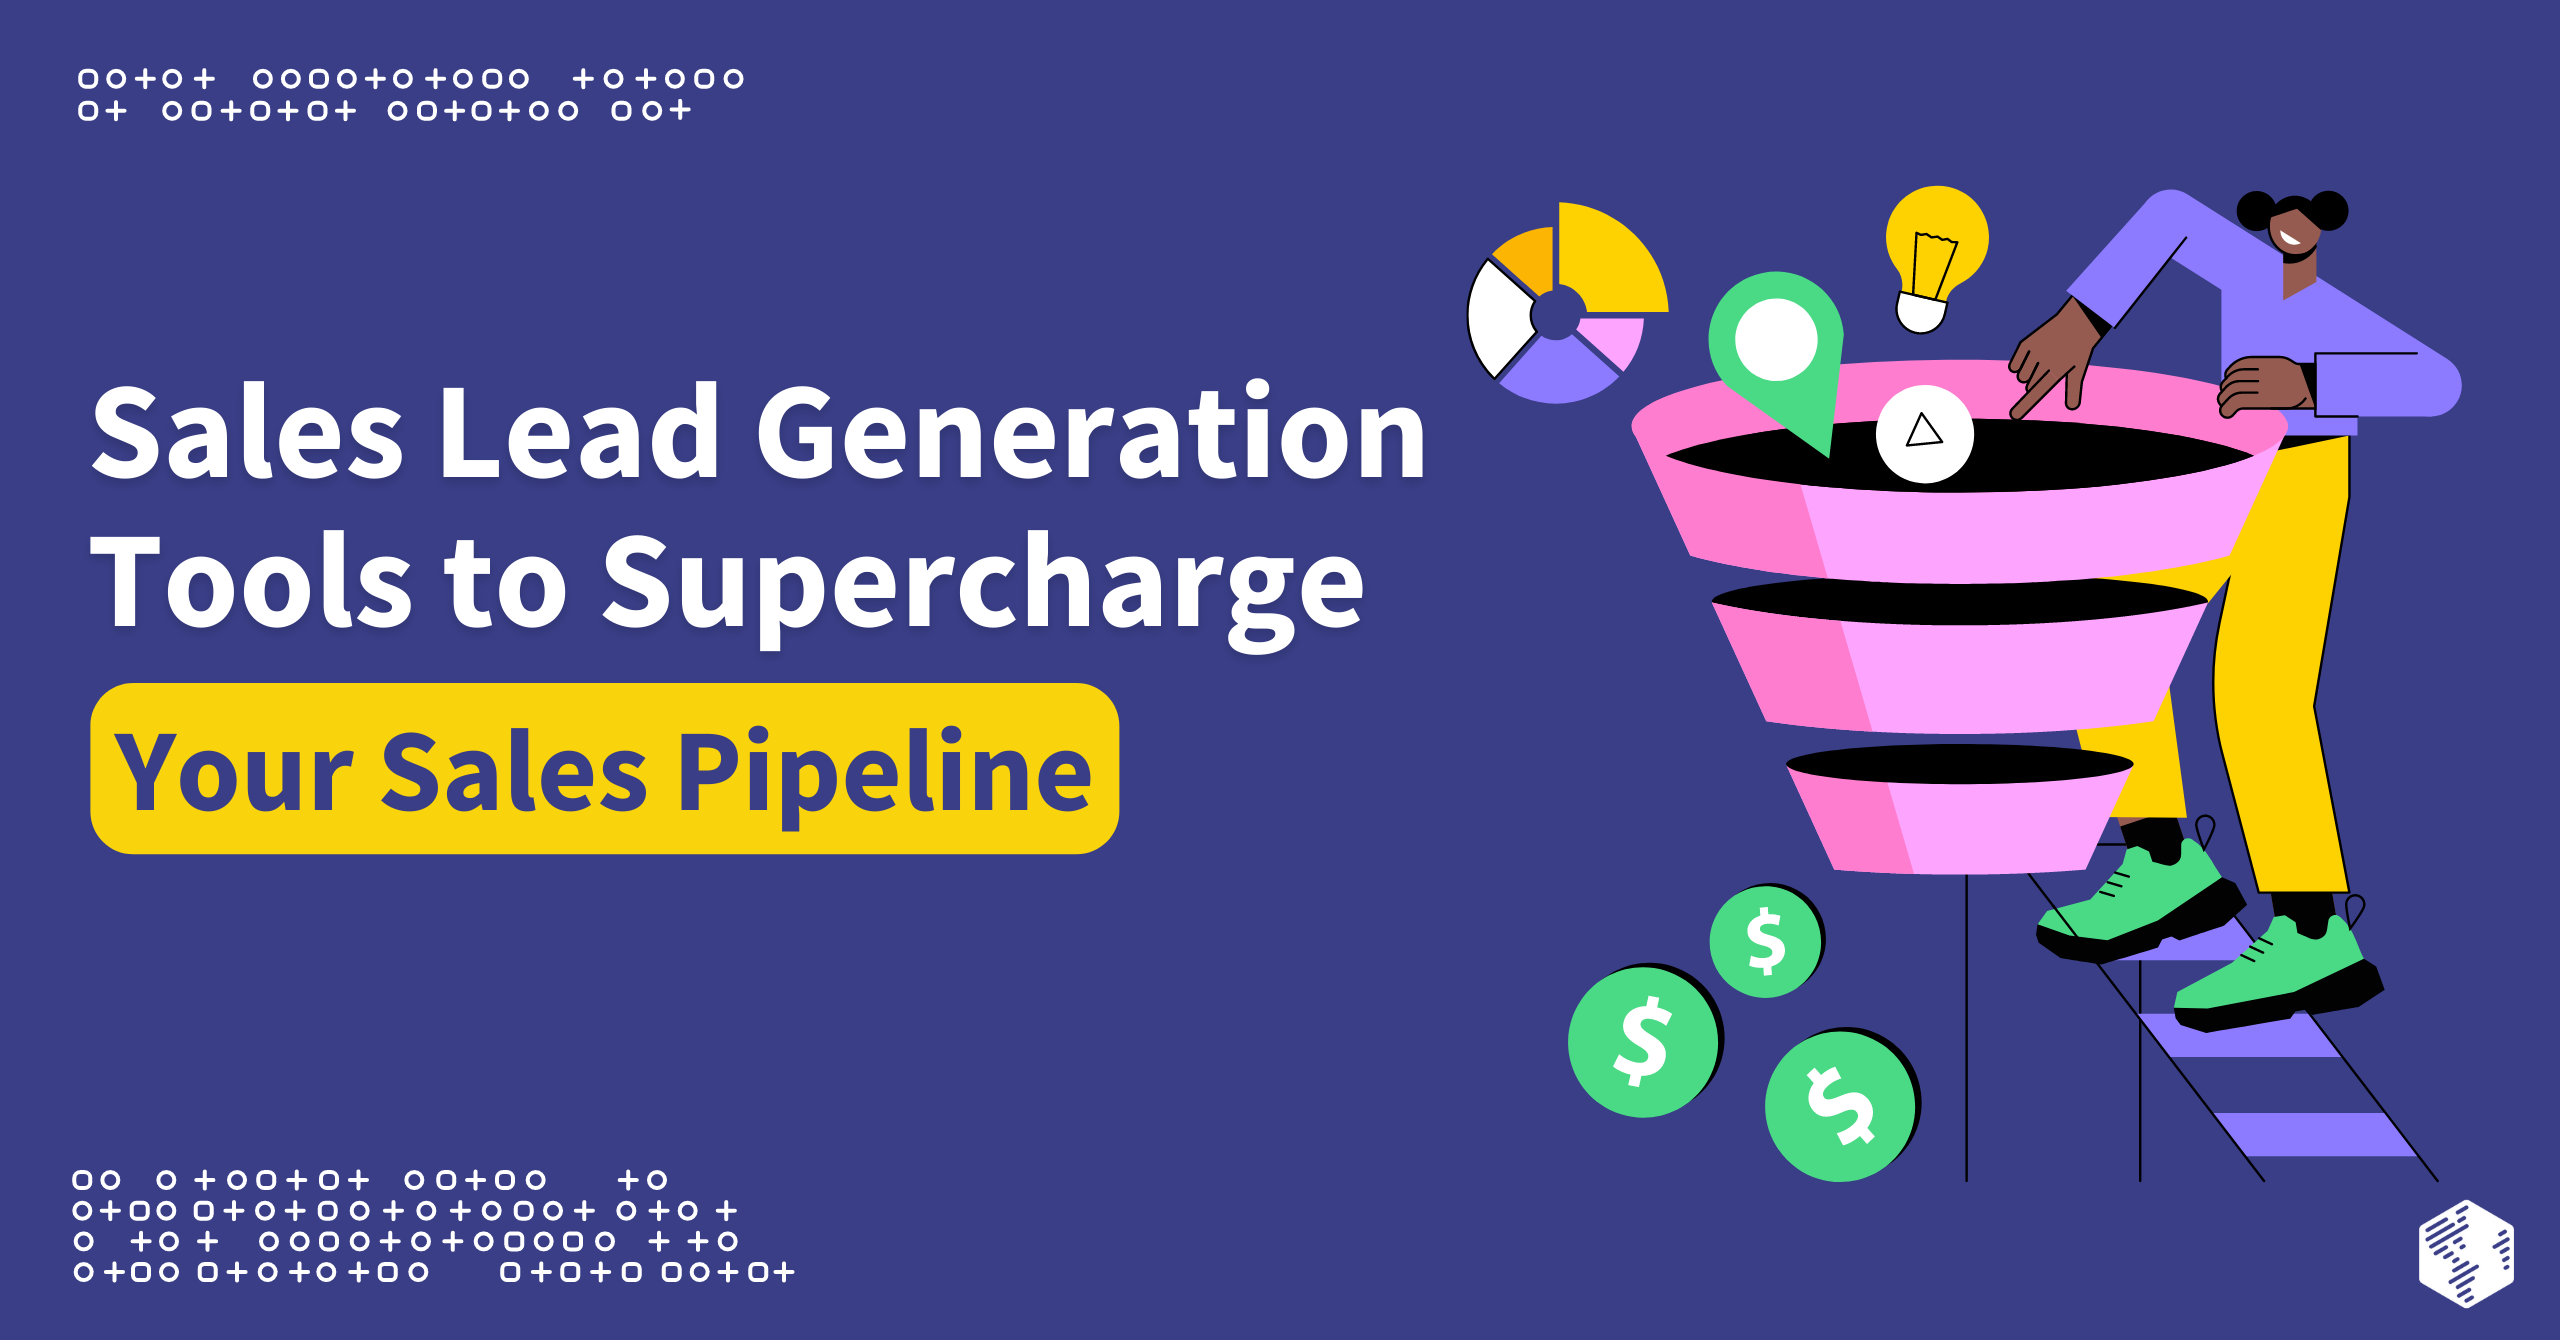 Sales Lead Generation Tools to Supercharge Your Sales Pipeline